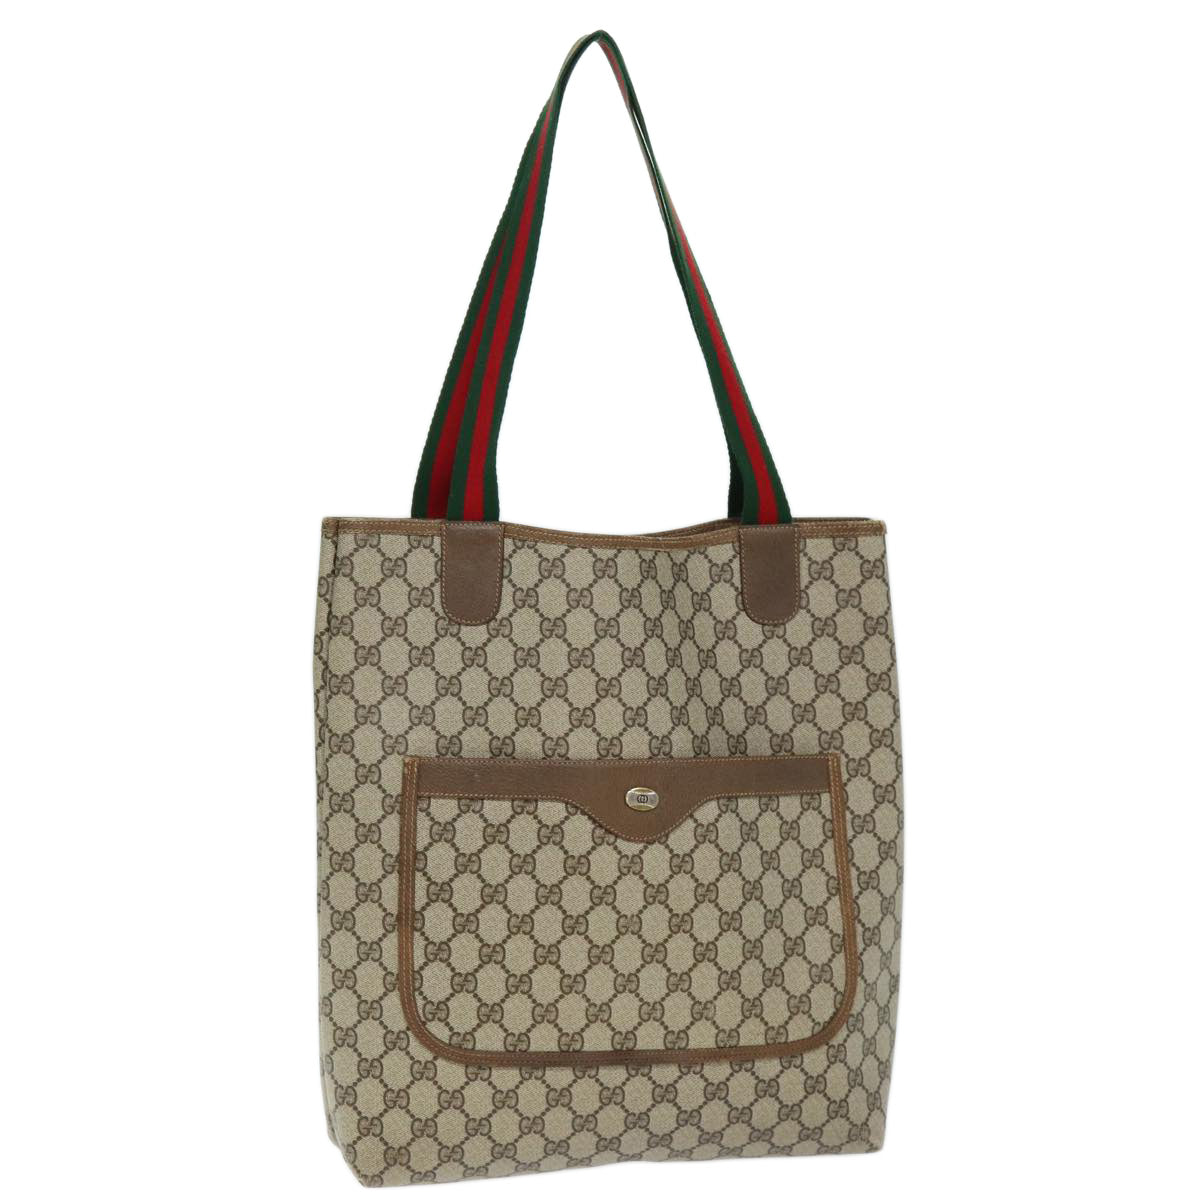 GUCCI GG Supreme Web Sherry Line Tote Bag Beige Red Green 39 02 003 Auth 73610